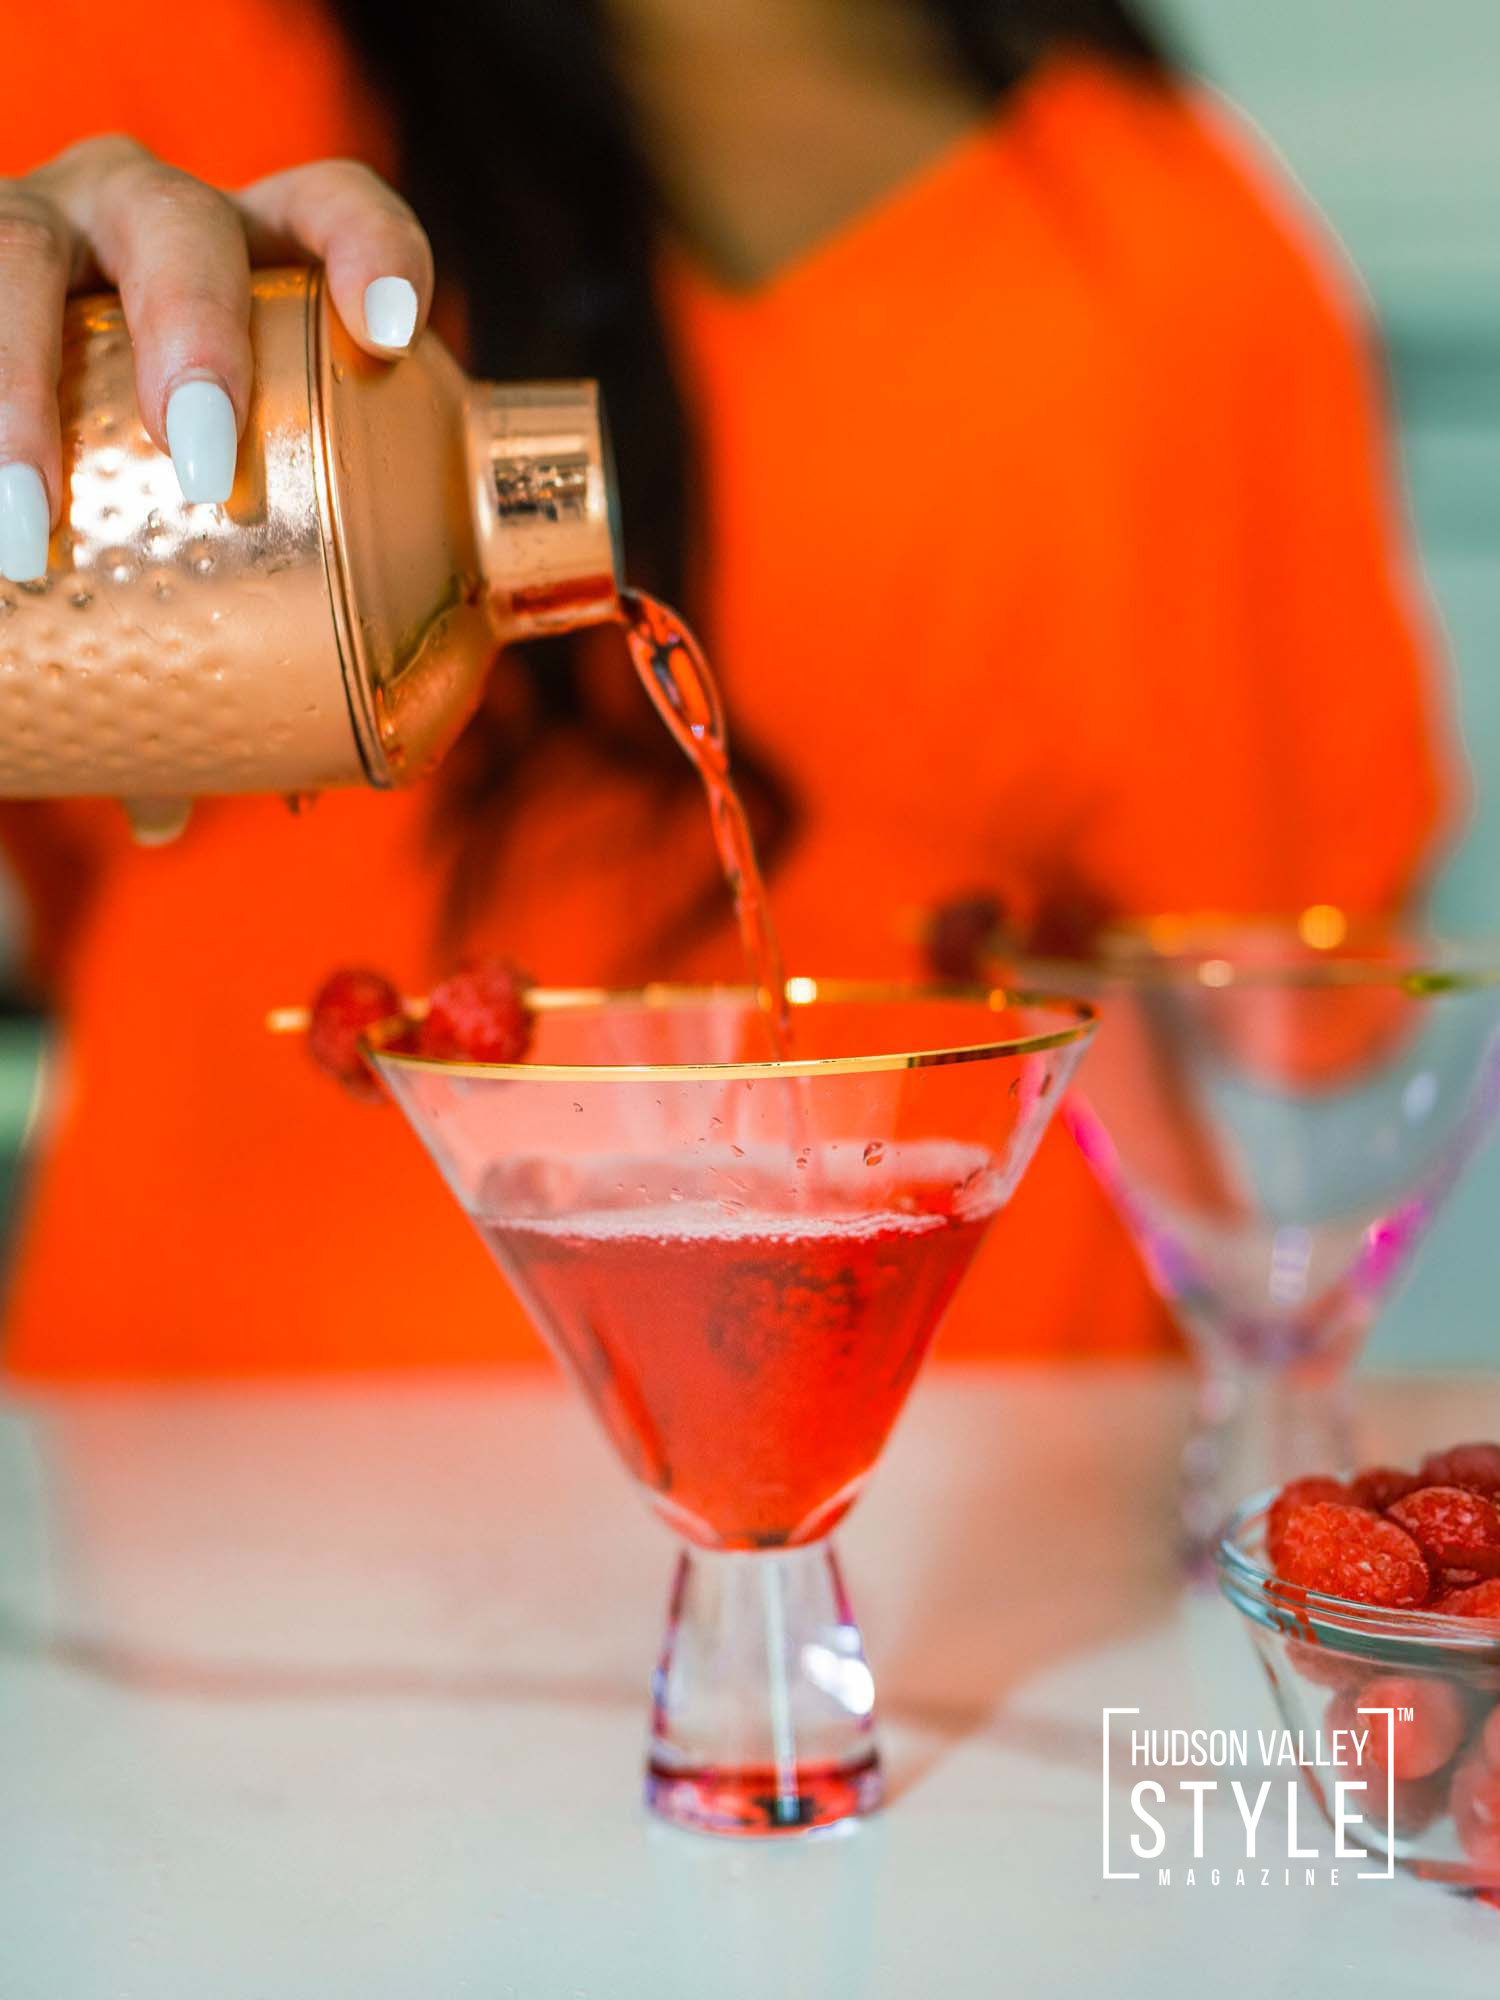 Hudson Valley Style Mixology with Jessica Mojica: The Poolside French Martini with a Tropical Pineapple Twist – Presented by Alluvion Media – Luxury Hospitality Photography in the Hudson Valley, Catskills and Hamptons